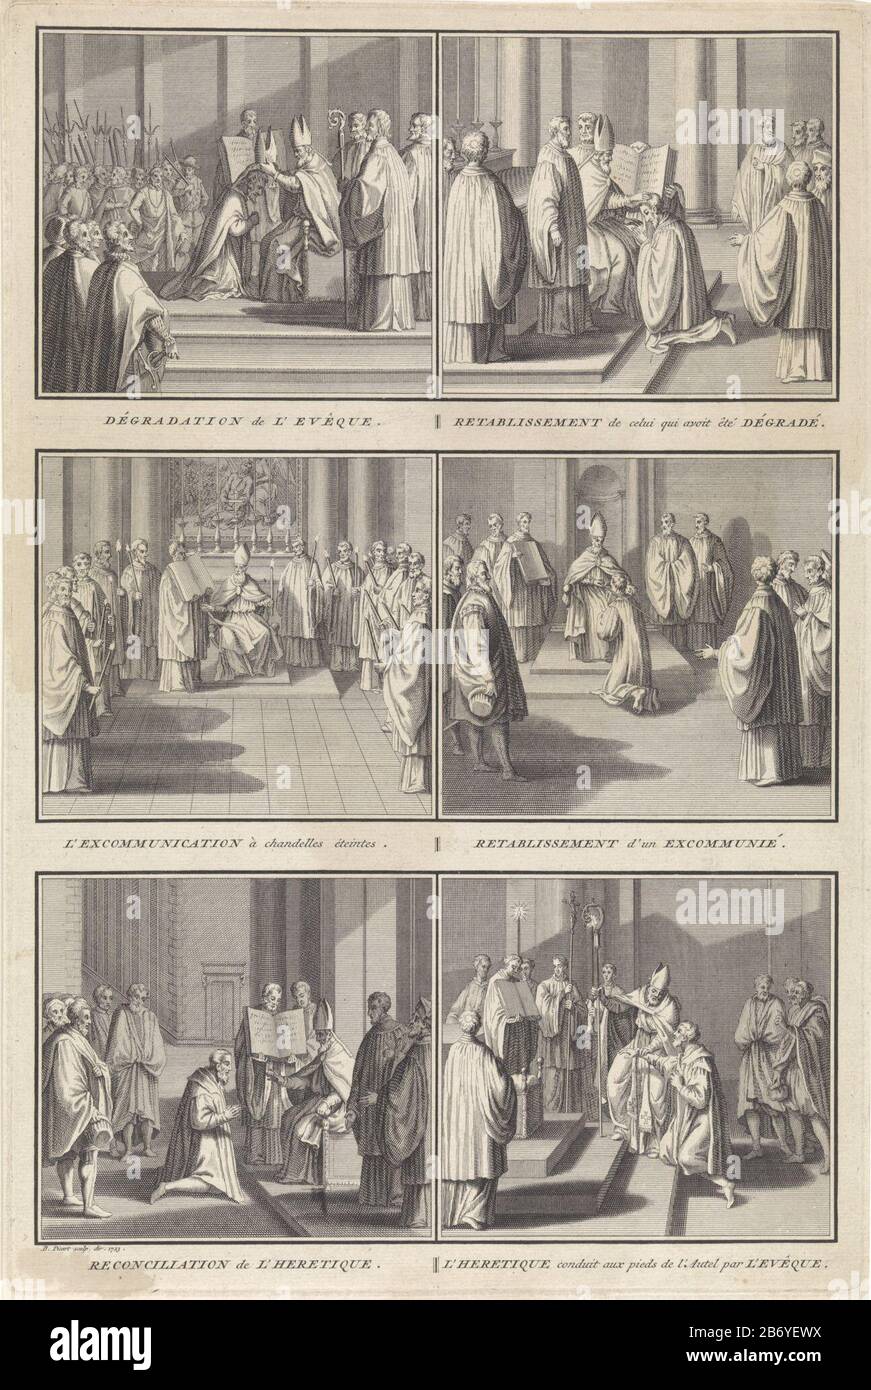 Leaf with six performances of punishment, excommunication, and recovery in the Roman Catholic church. Top left: A bishop is profaned by taking him off the miter. Top right: Recovery for someone who has been defiled. Left center: An excommunication is pronounced, Where: be blown after the candles. Middle right: Recovery for exile or ge-excommunicated. Bottom left: Restoring a heretic. Bottom right: A heretic by the bishop to the altar geleid. Manufacturer : printmaker: Bernard Picart (studio) supervision: Bernard Picart (listed property) Place manufacture: Amsterdam Date: 1723 Physical features Stock Photo